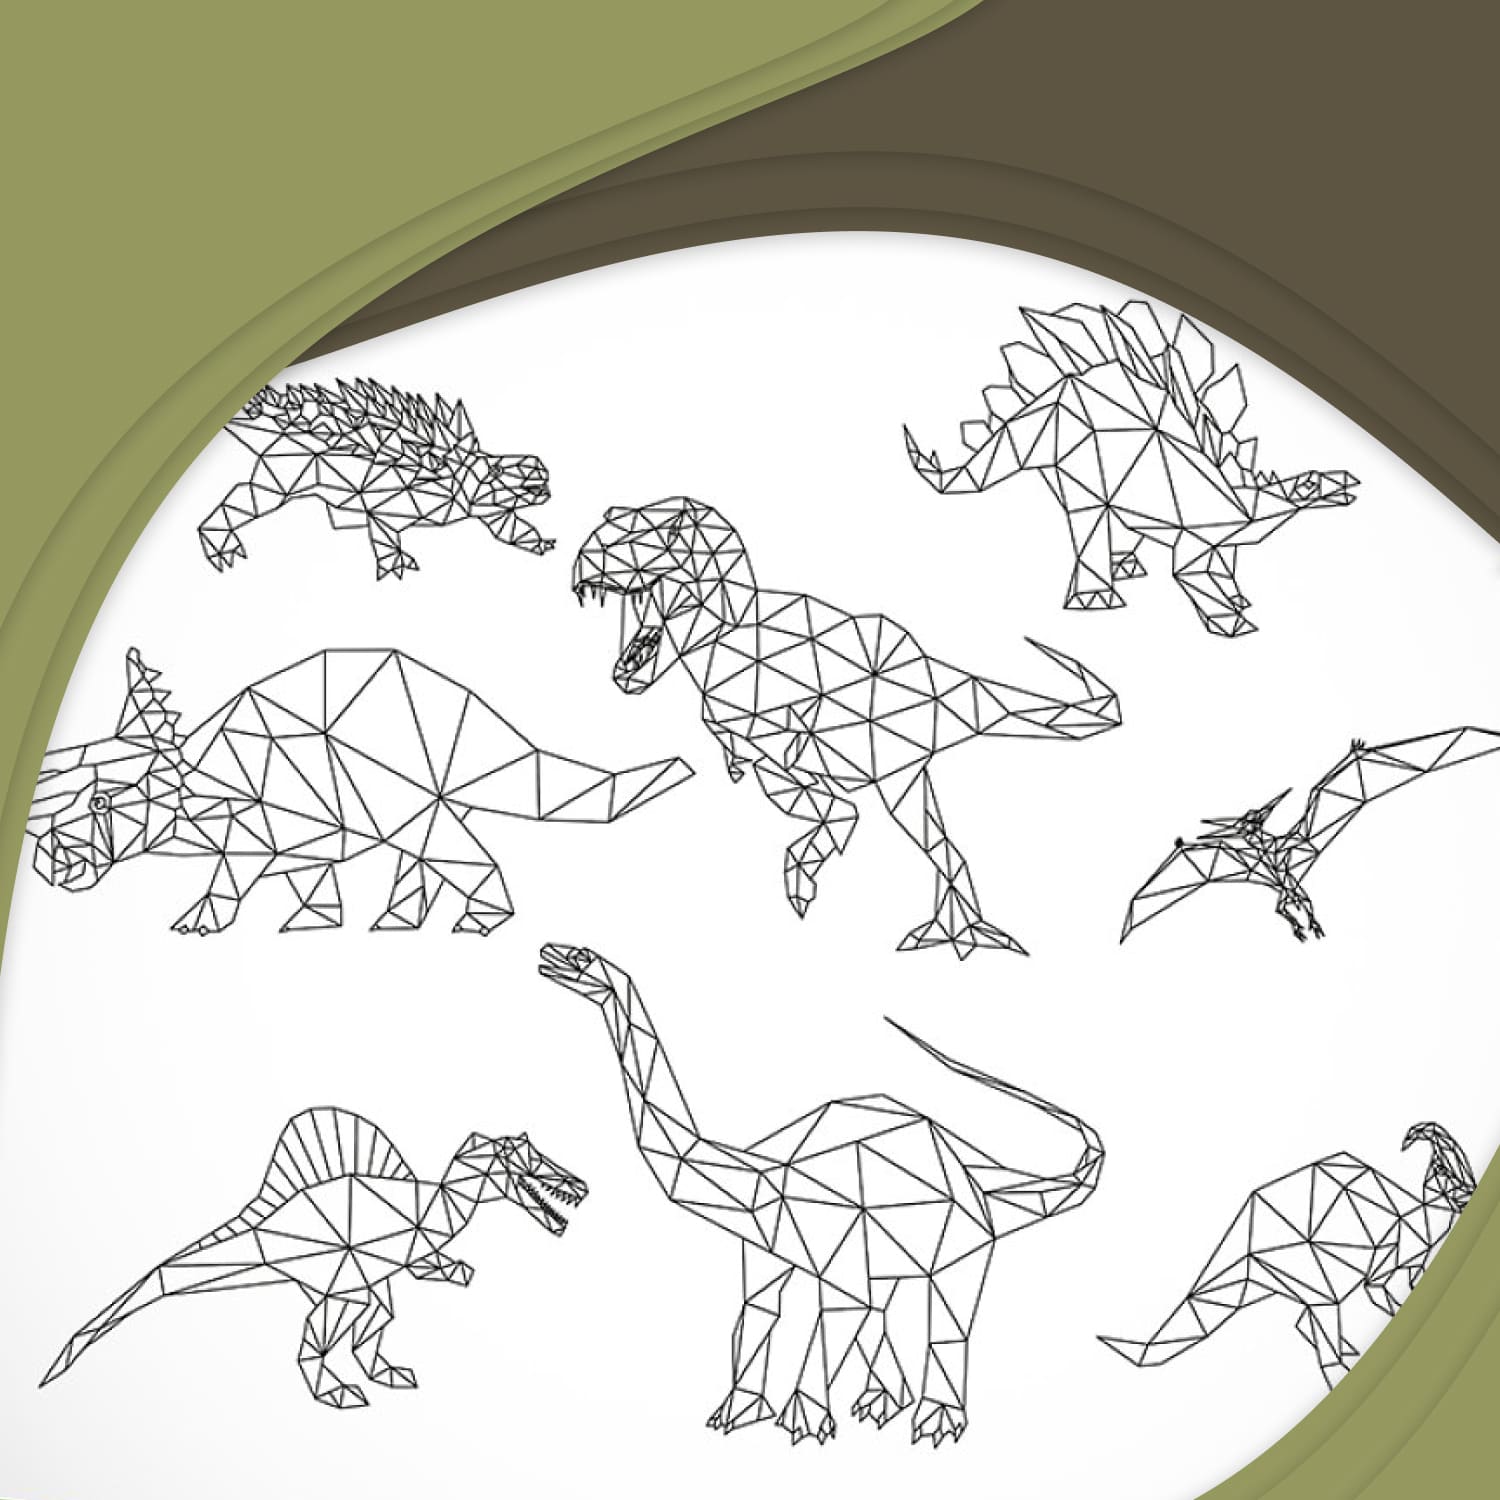 set of 8 low poly dinosaurs illustrations.